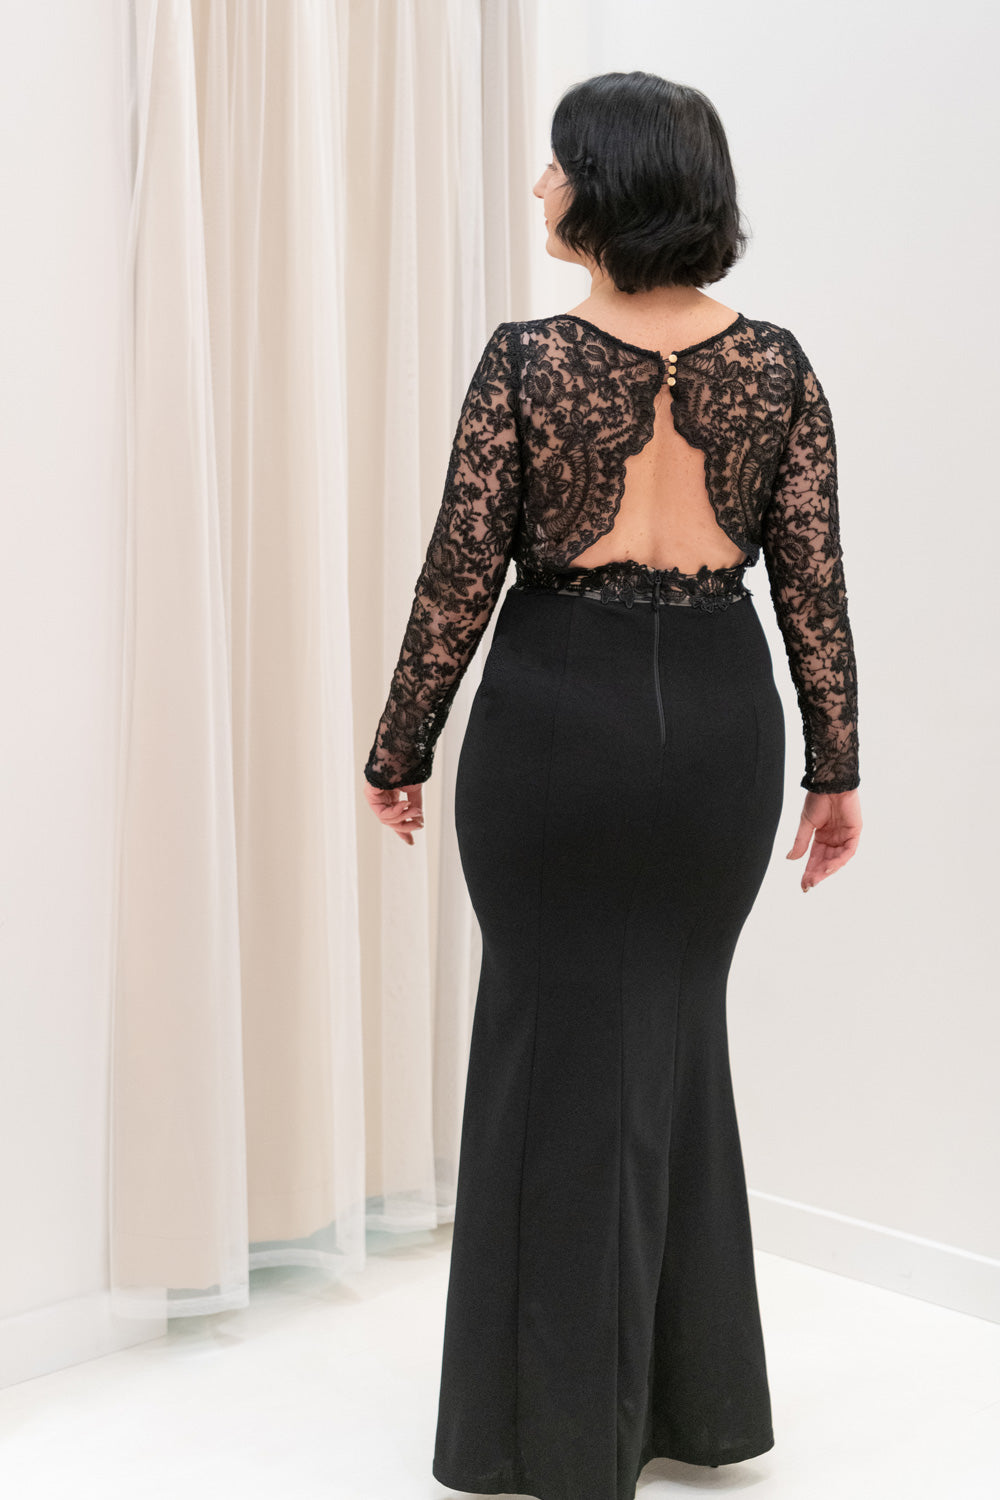 Elegant-Long-Sleeve-Lace-Bodice-Evening-Gown-in-Black